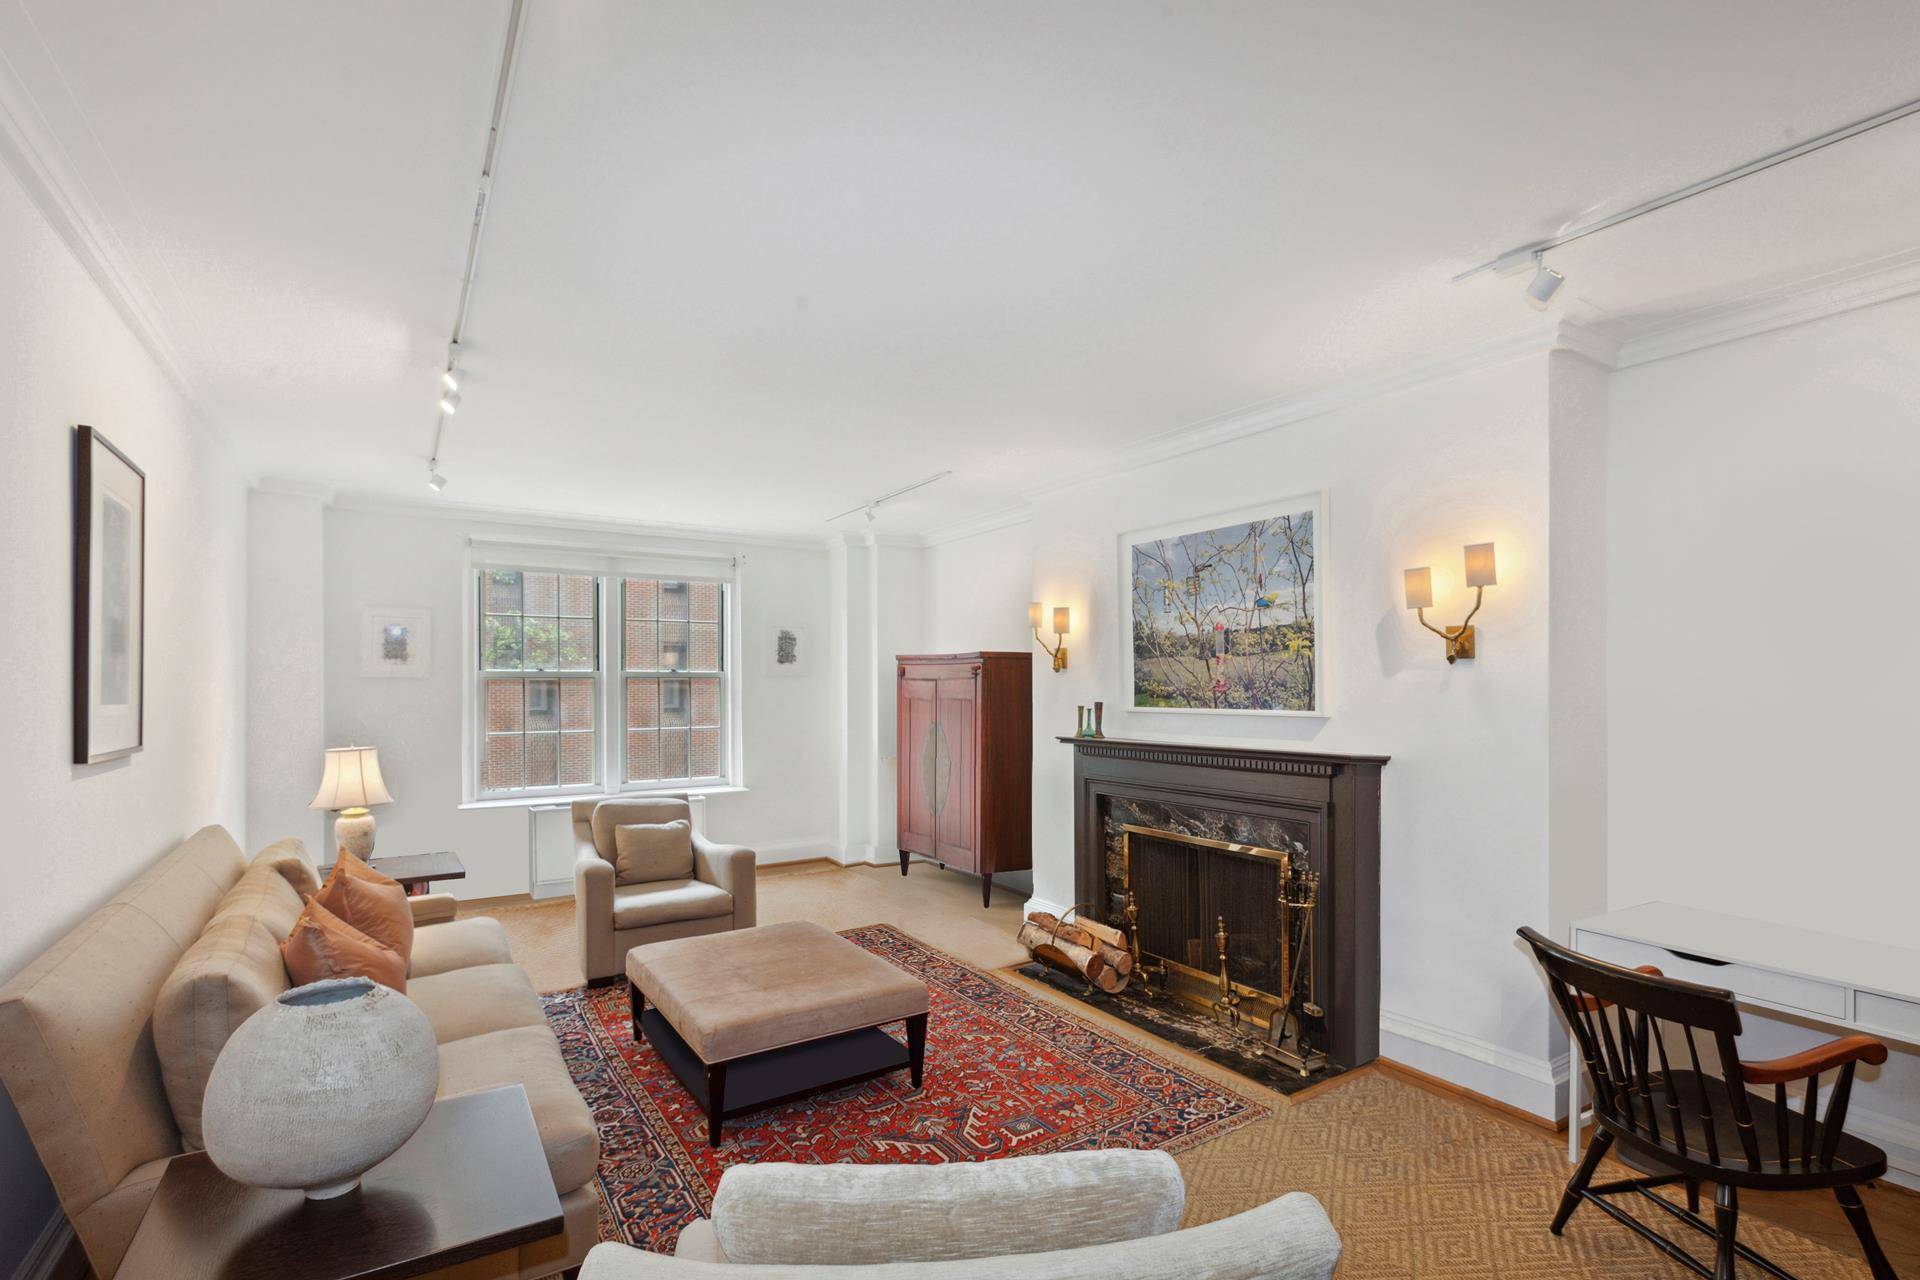 Welcome home to this quintessential Park Avenue 7 room charming pre war residence with wonderful natural light.